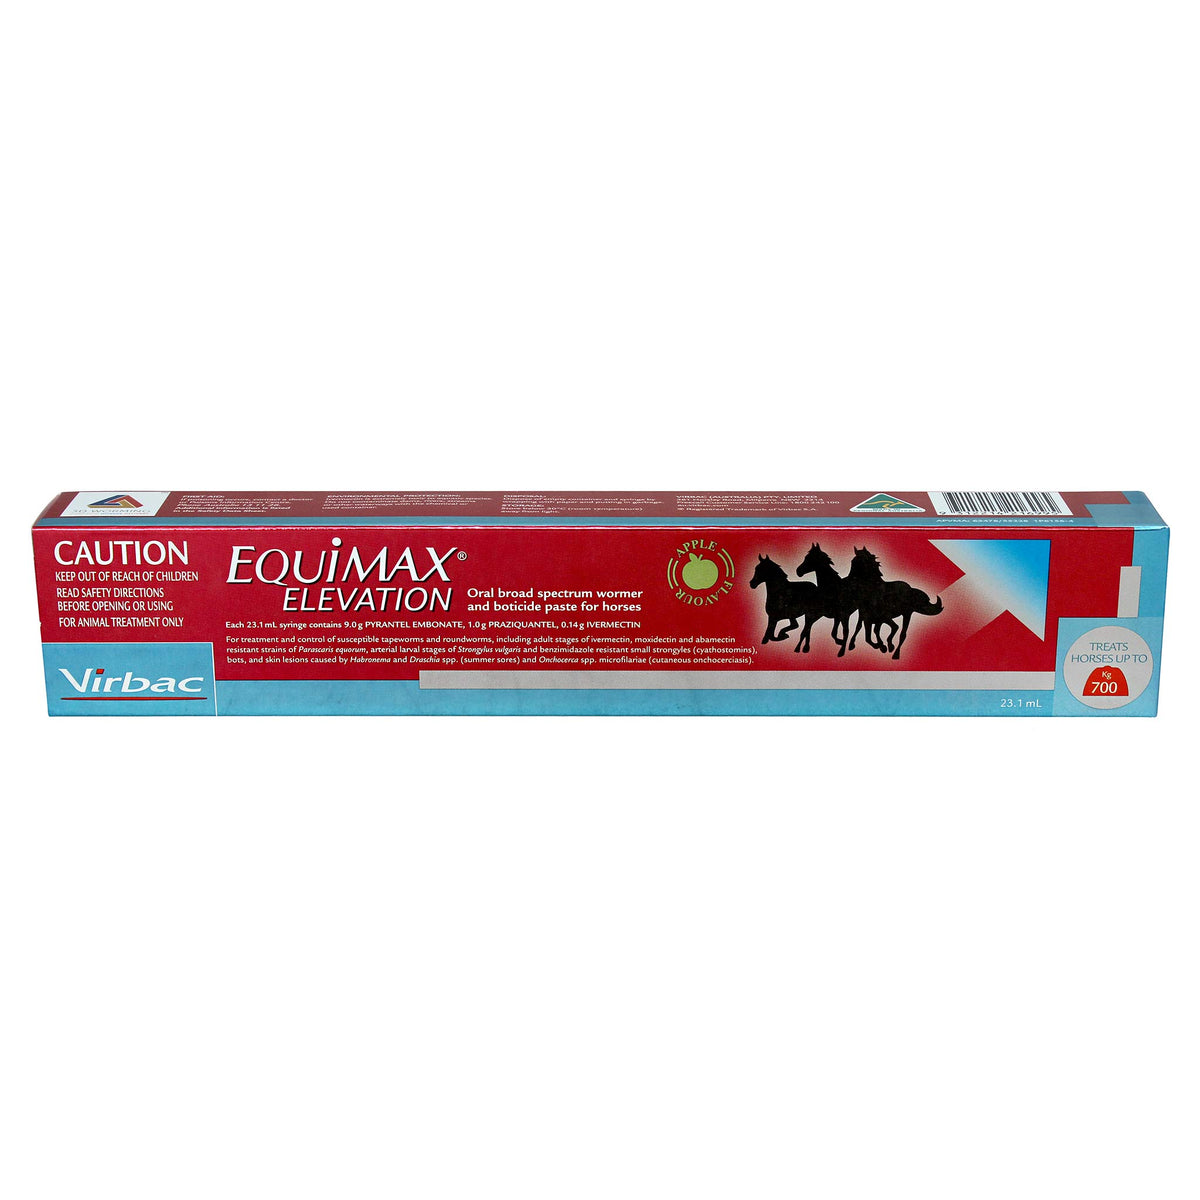 Equimax Elevation Oral Wormer and Boticide for Horses 23.1mL